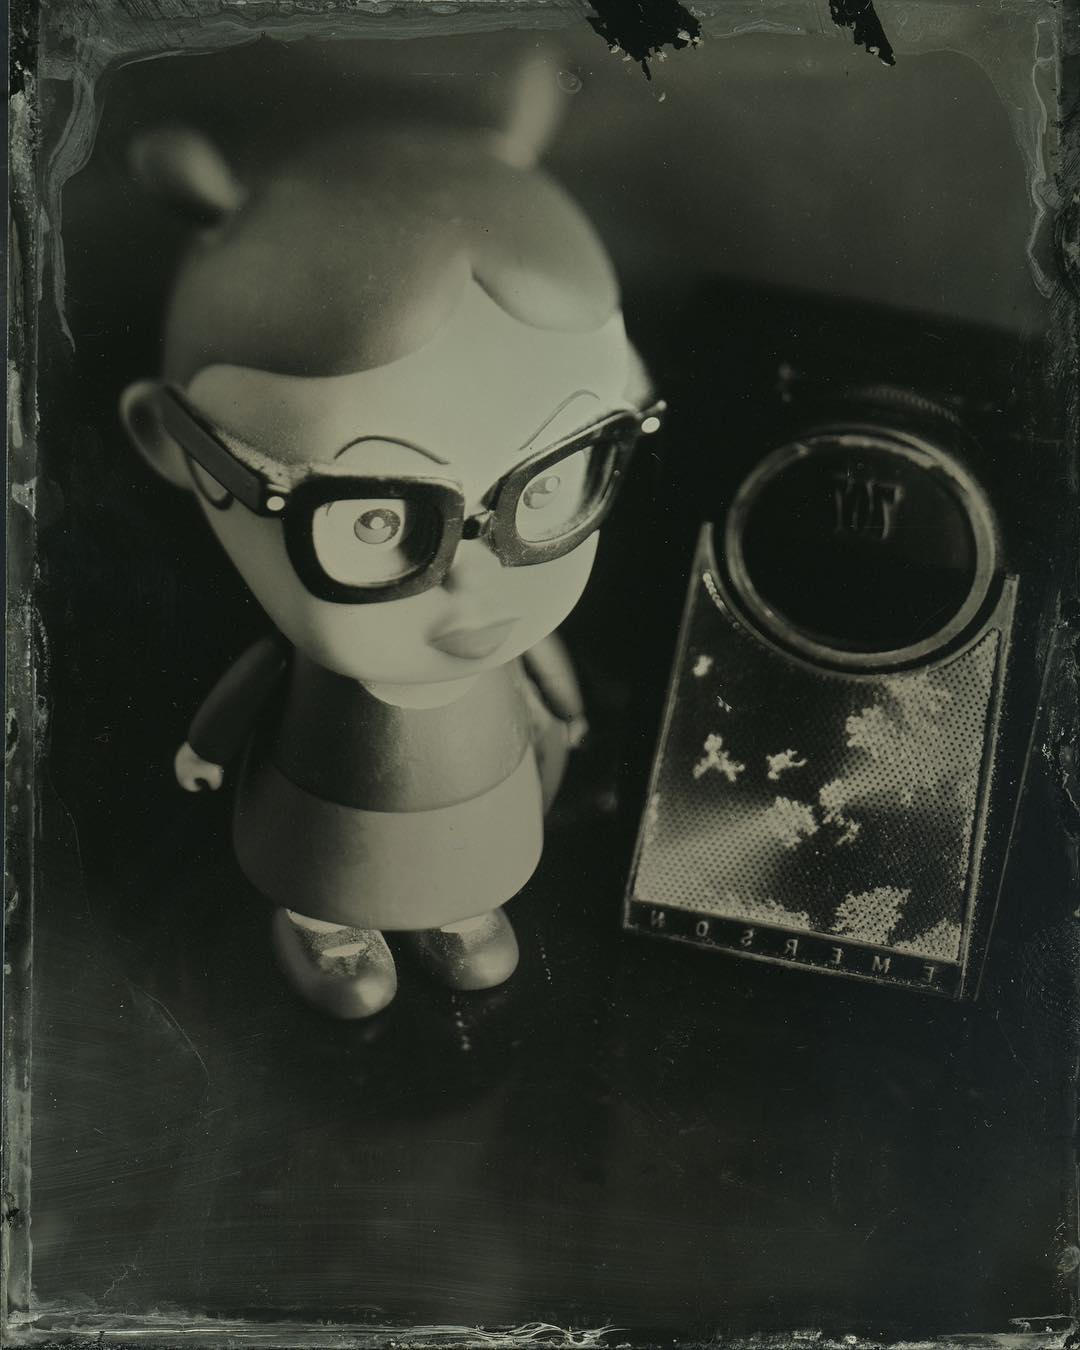 Little Enid listens to the radio

Another tintype from last weekend @penumbrafoundation with @elmalayheehoo. I highly recommend Penumbraâs classes if youâre interested in trying this. #tintype #wetplate #wetplatecollodion #largeformat #4x5 #workshop